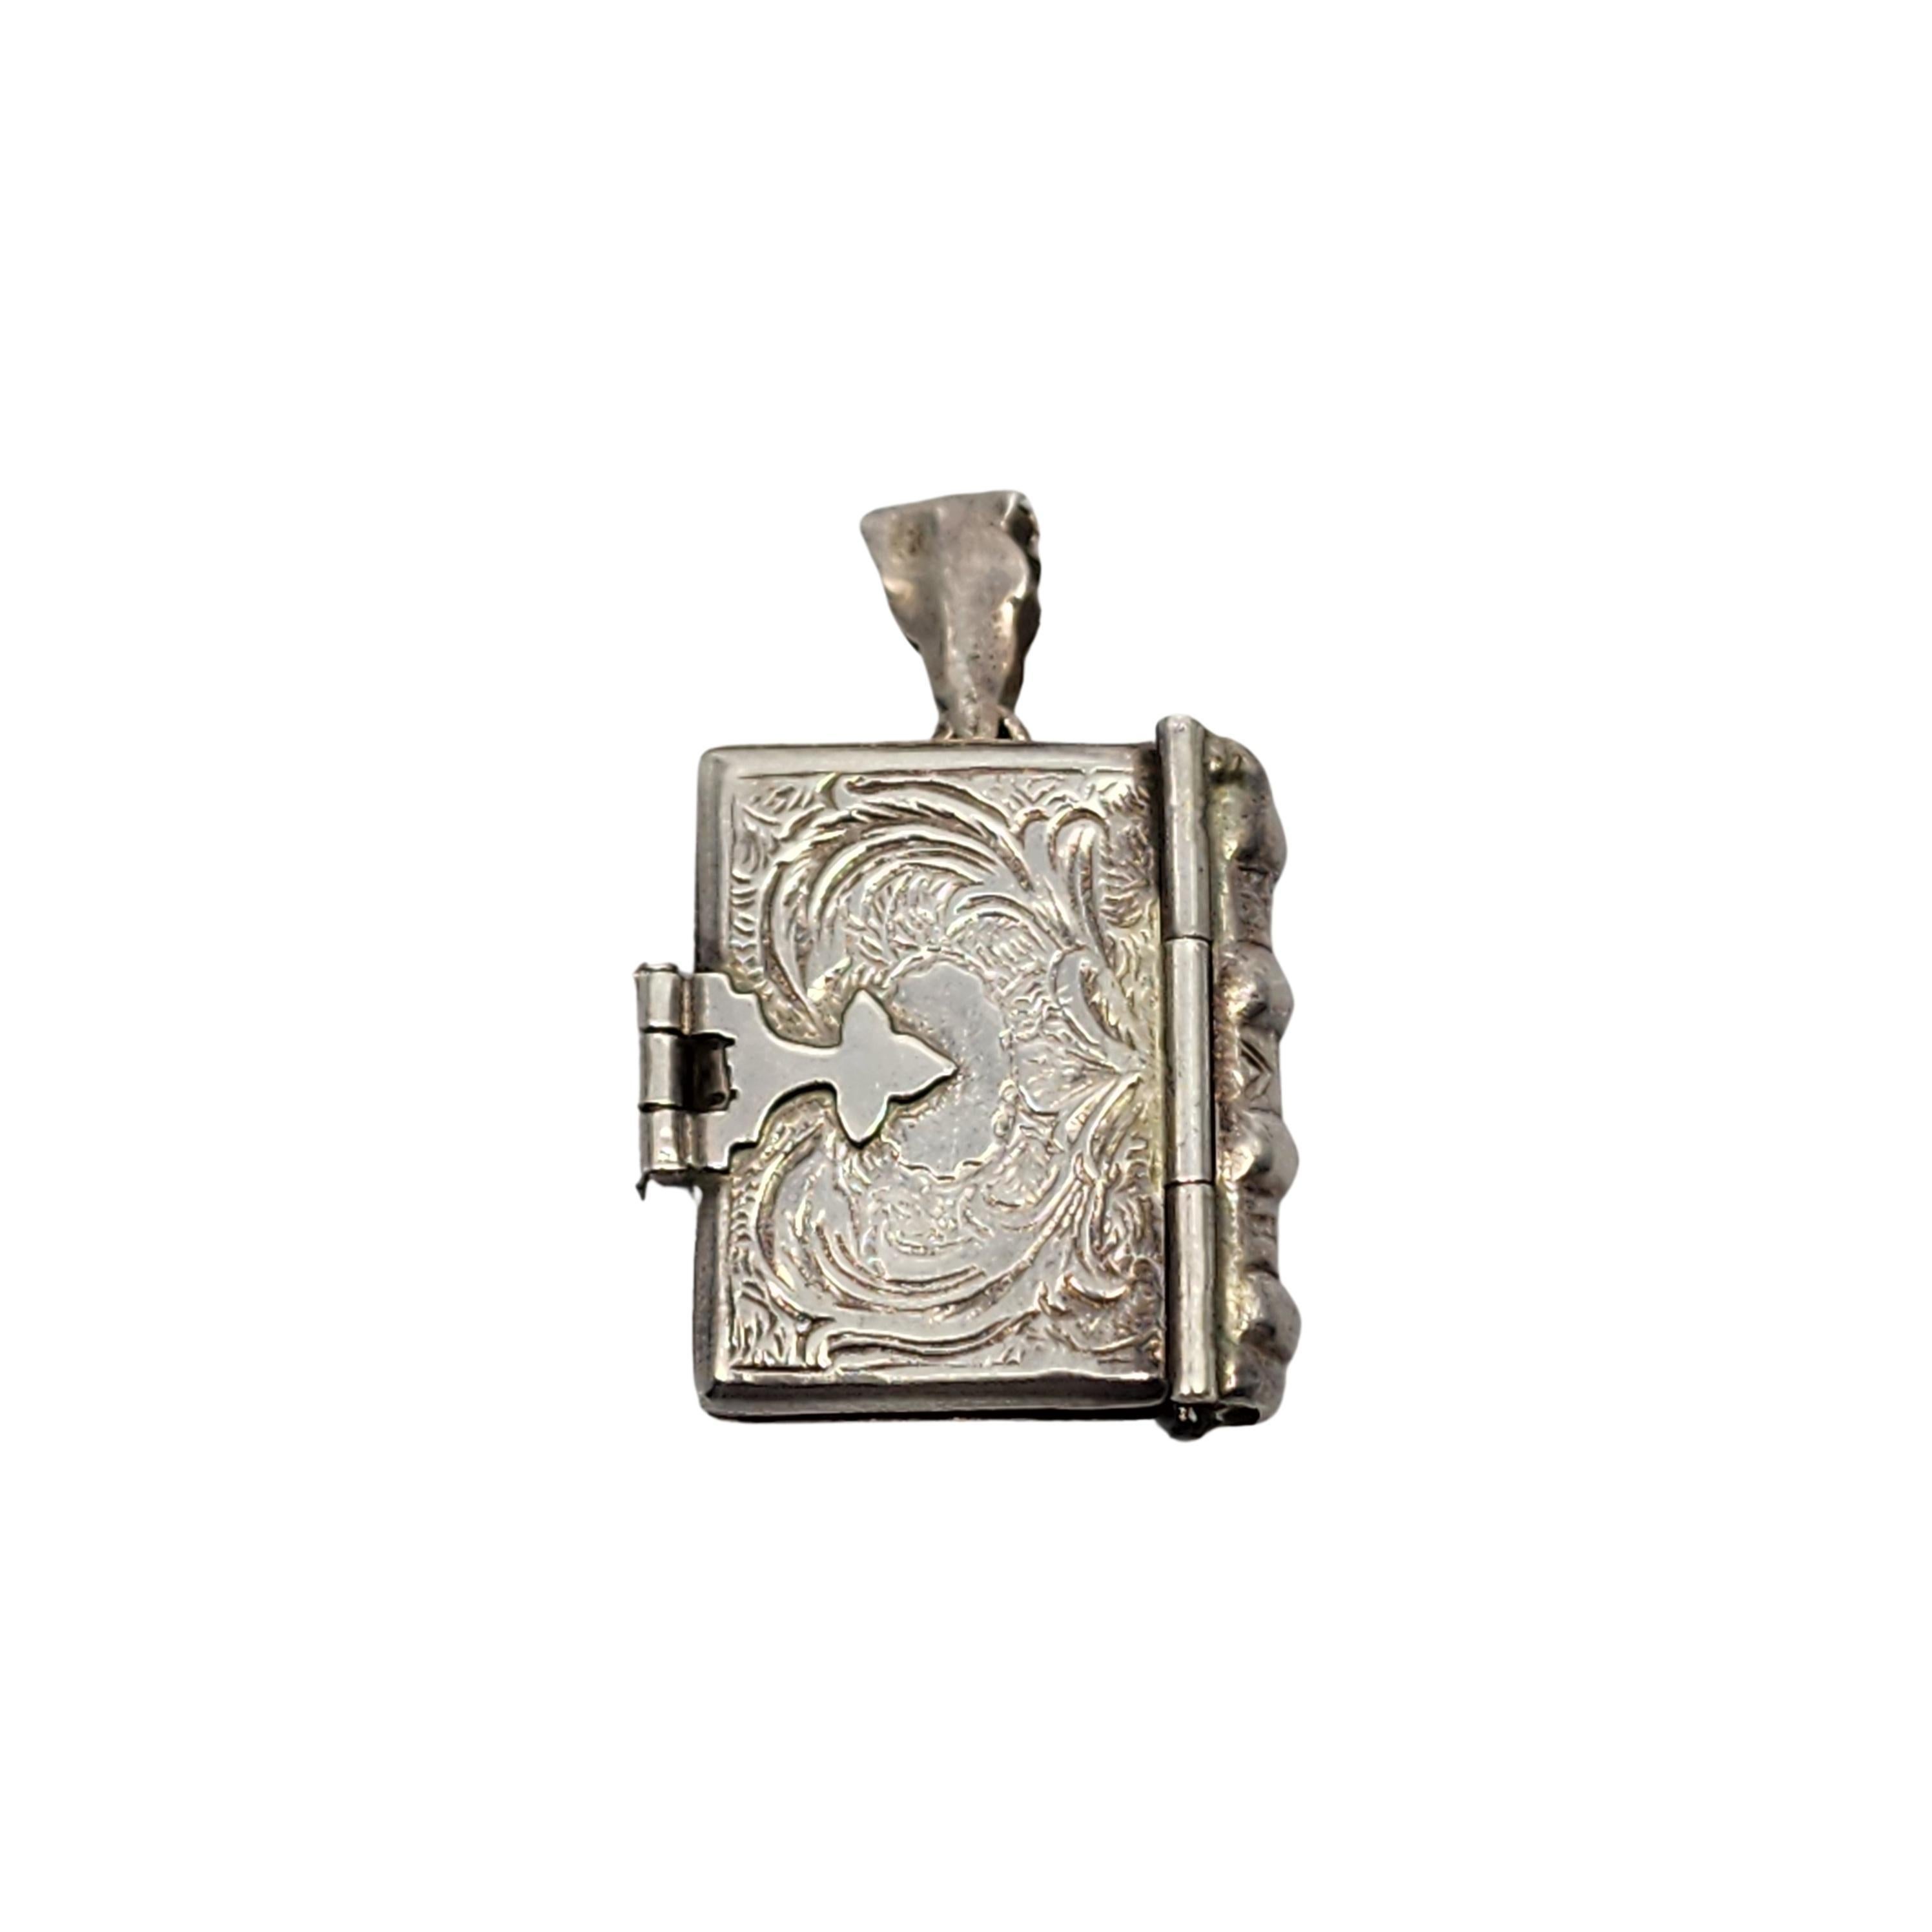 Vintage sterling silver Birmingham import picture book locket, circa 1998.

This locket pendant opens up to hold a photo. Book stays closed with a clasp on the side. Features beautiful etched designs on the front and back covers. It was imported to